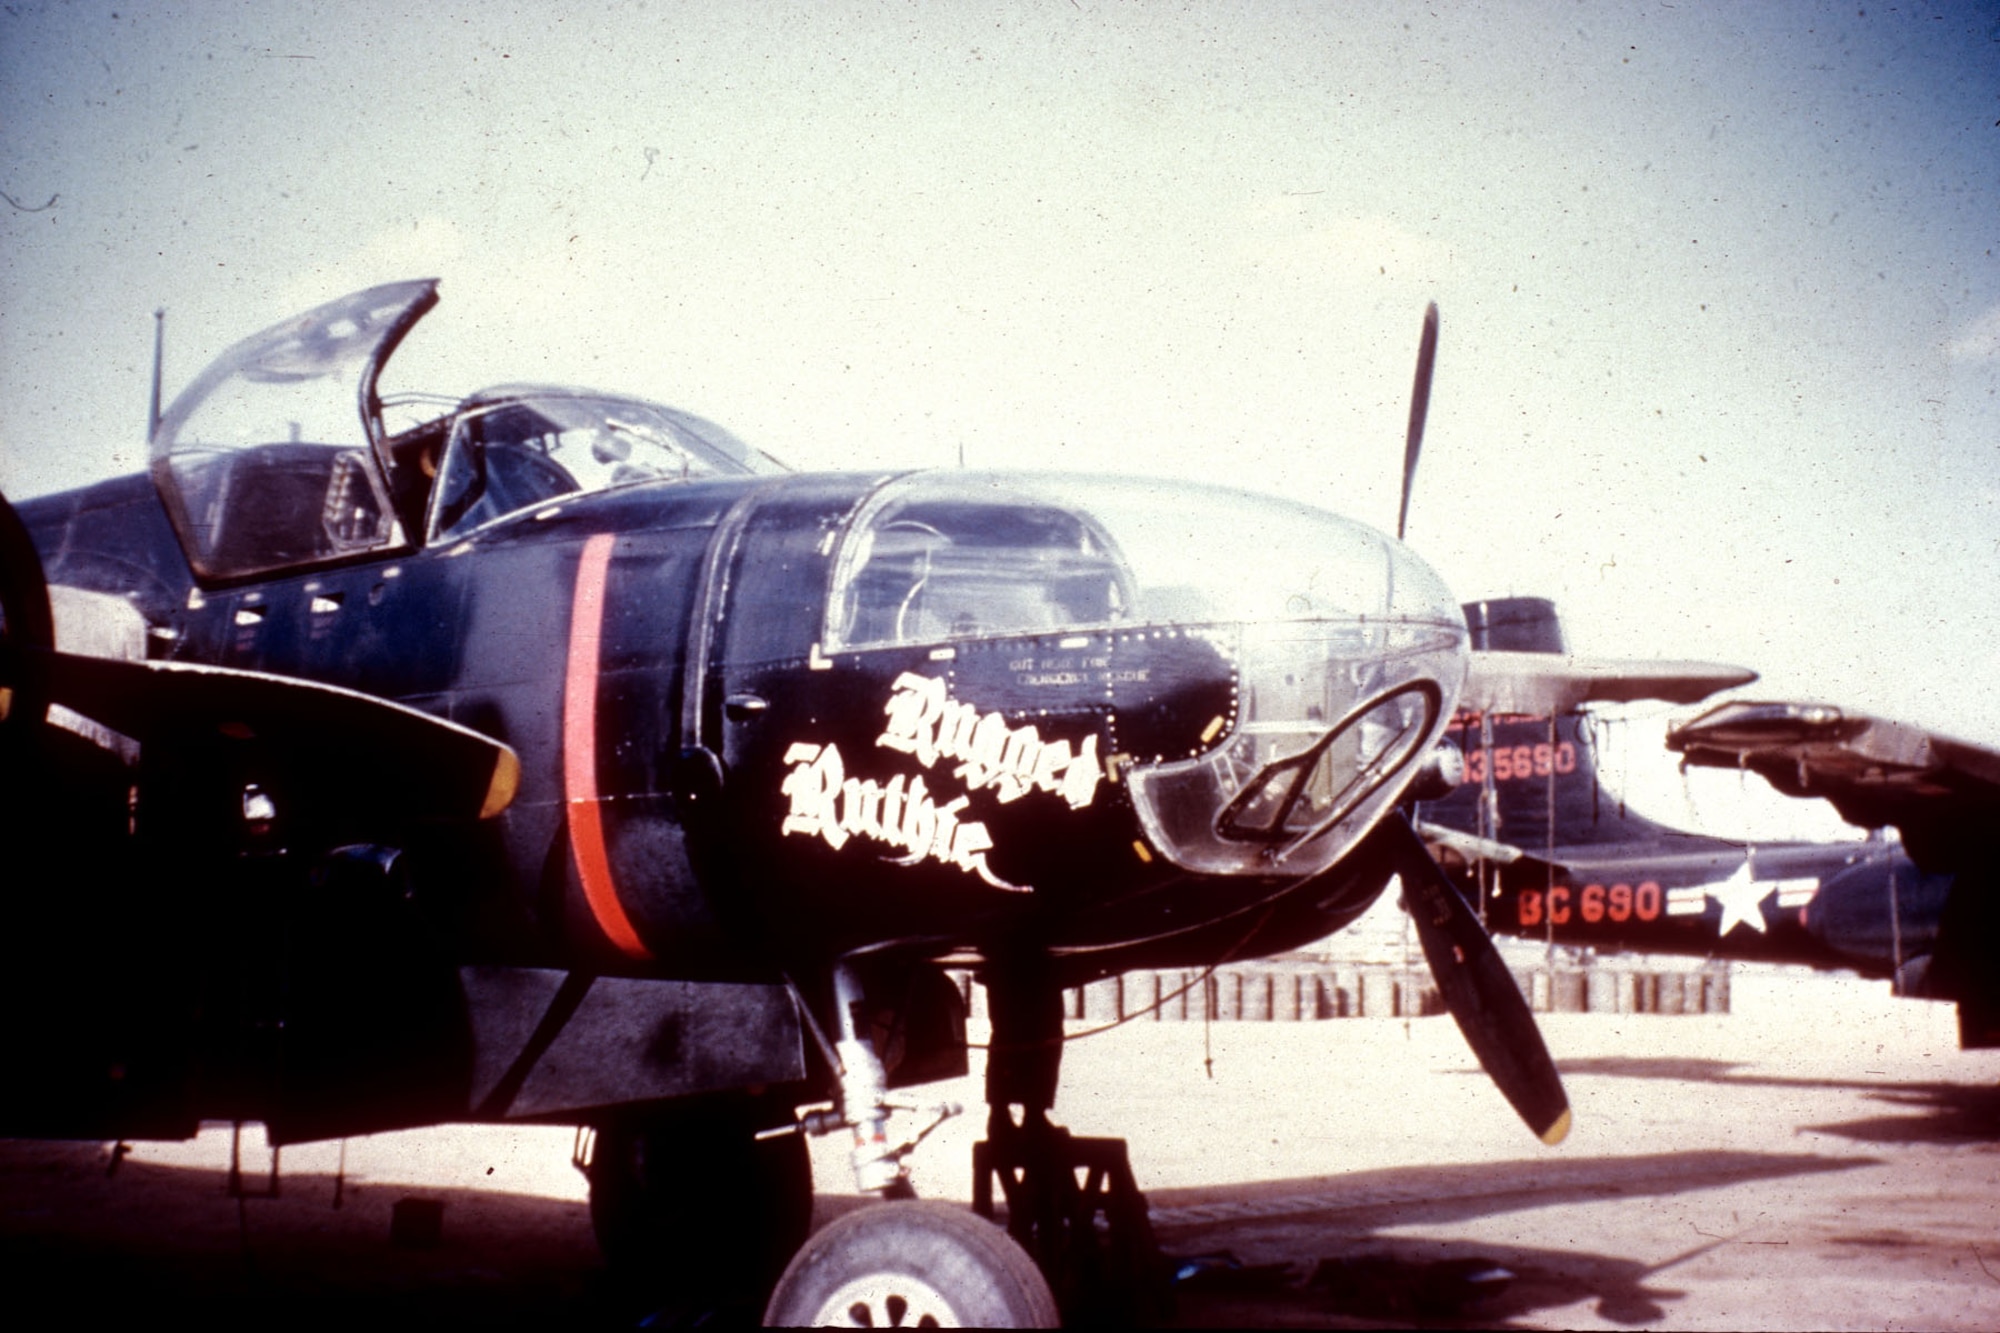 RB-26Cs carried cameras in the nose and in the fuselage behind the wings. (U.S. Air Force photo)